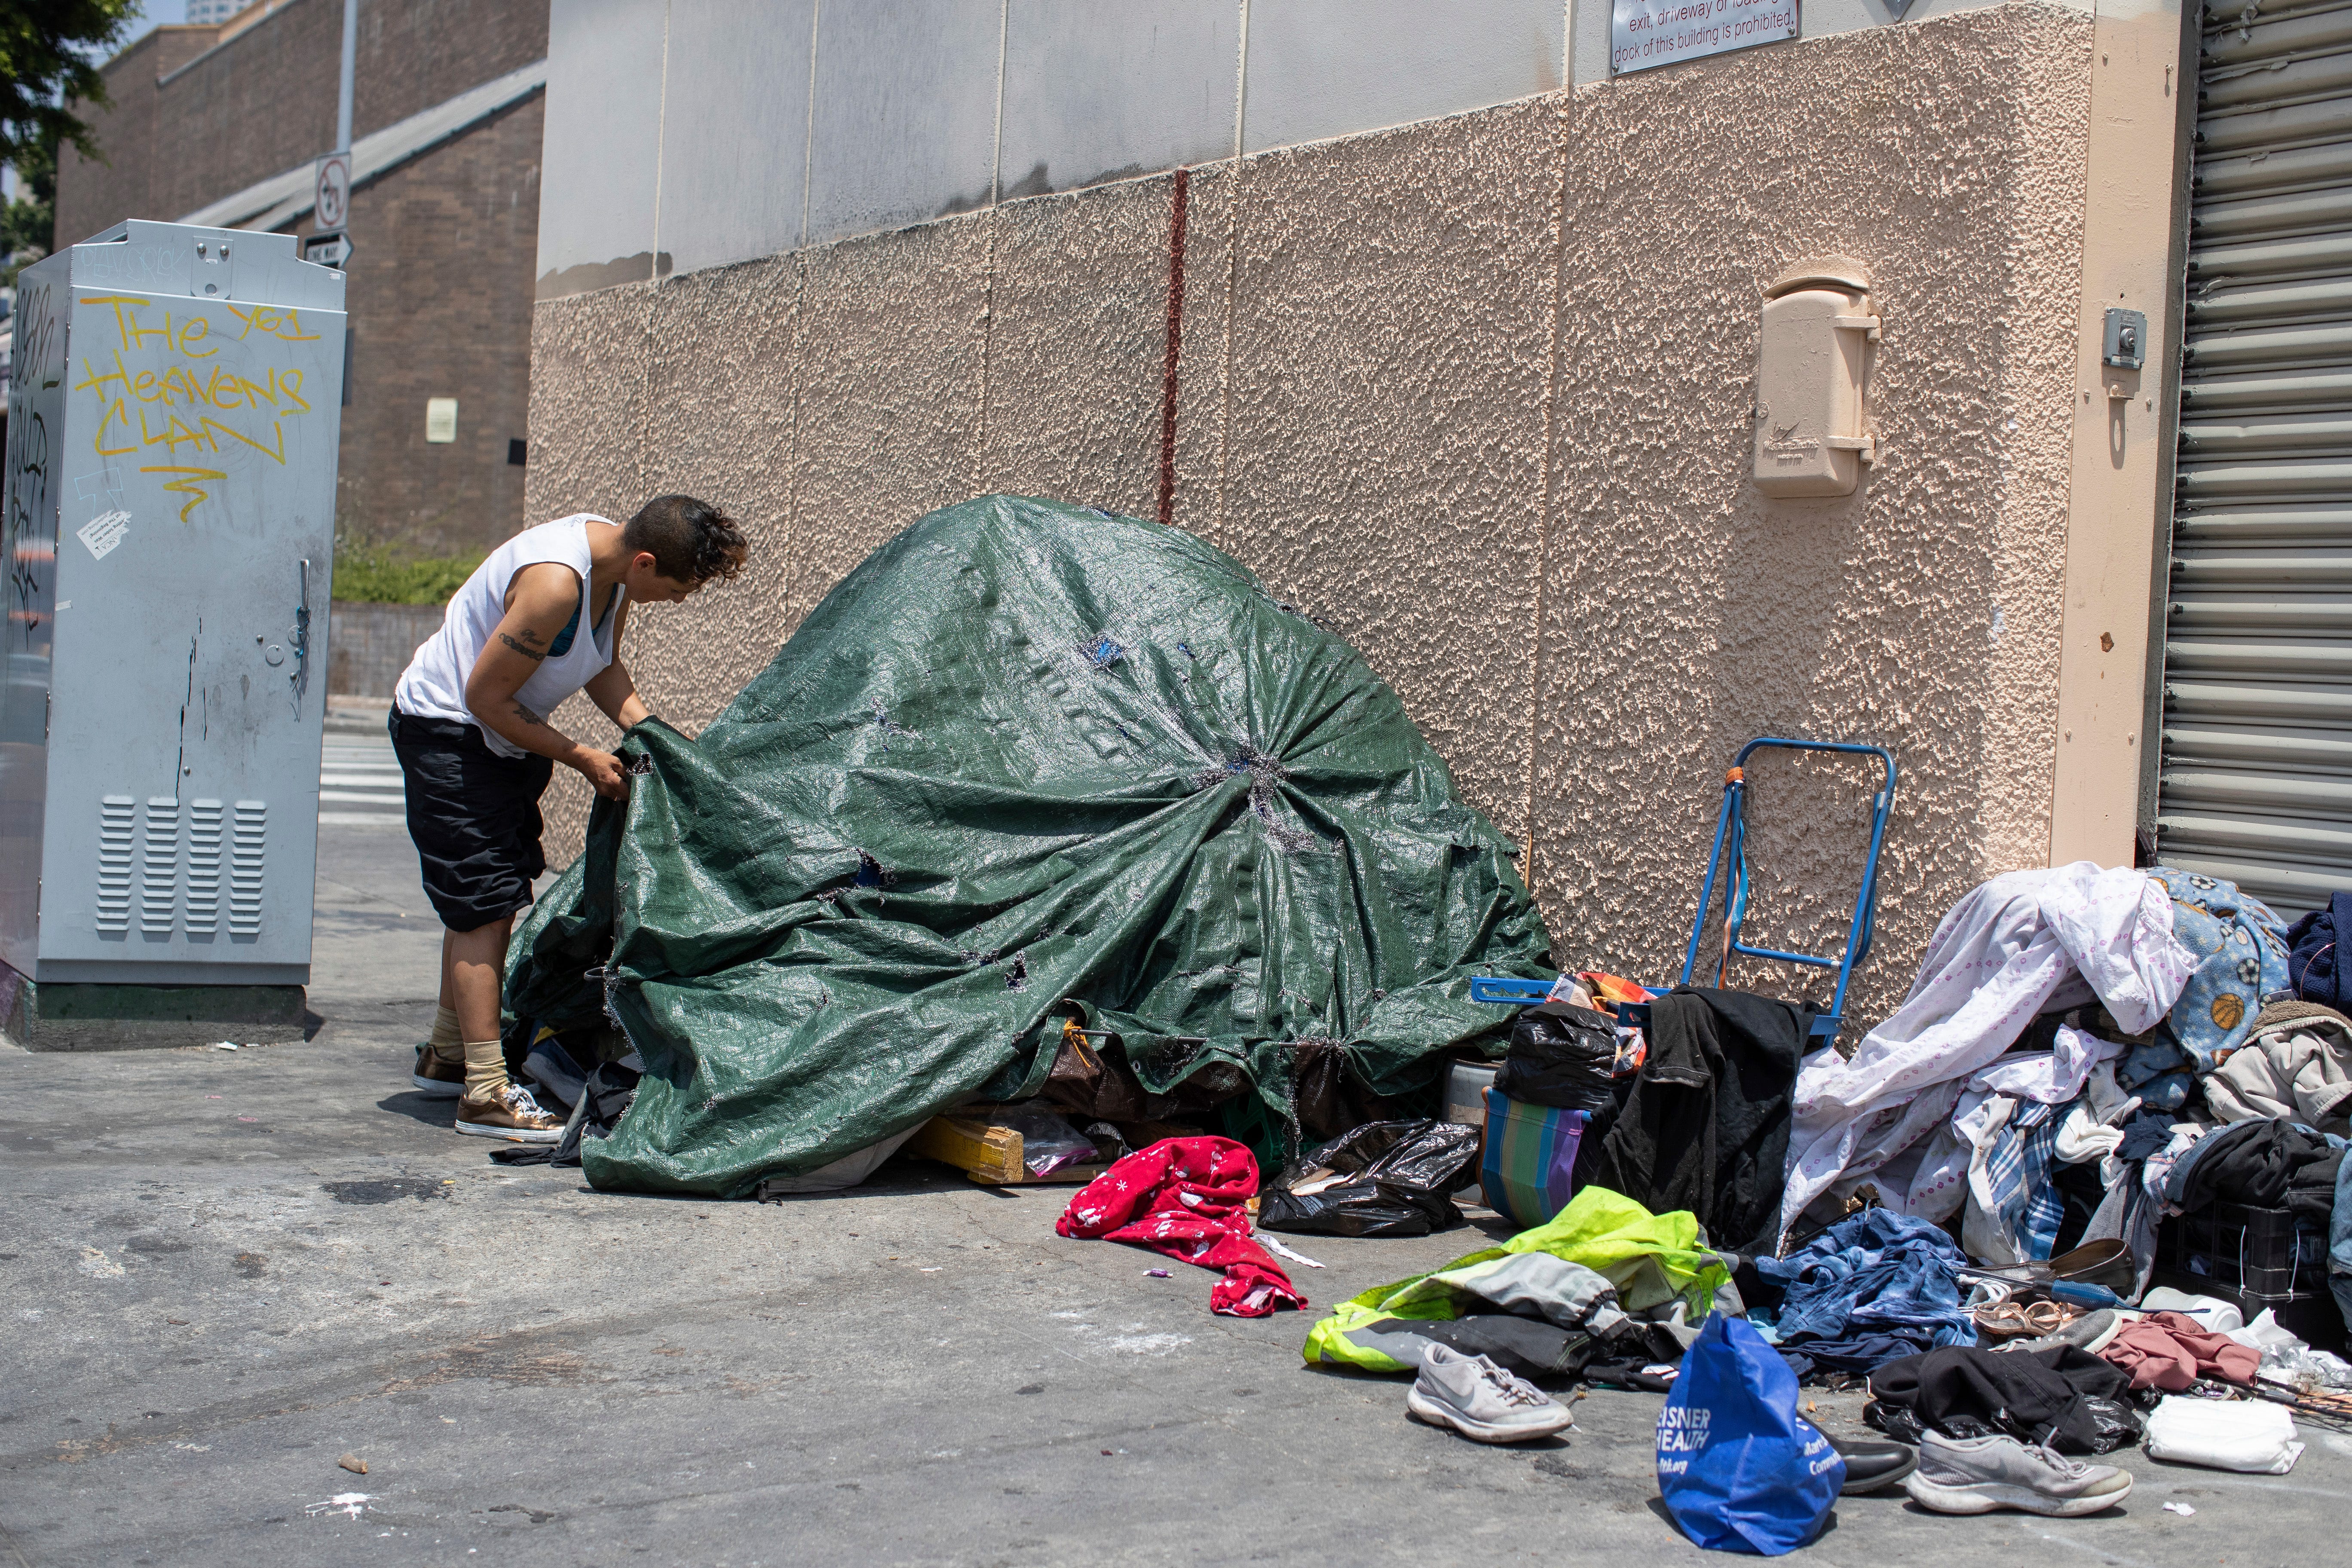 Los Angeles Homeless Population Up 12 Amid Affordable Housing Crisis